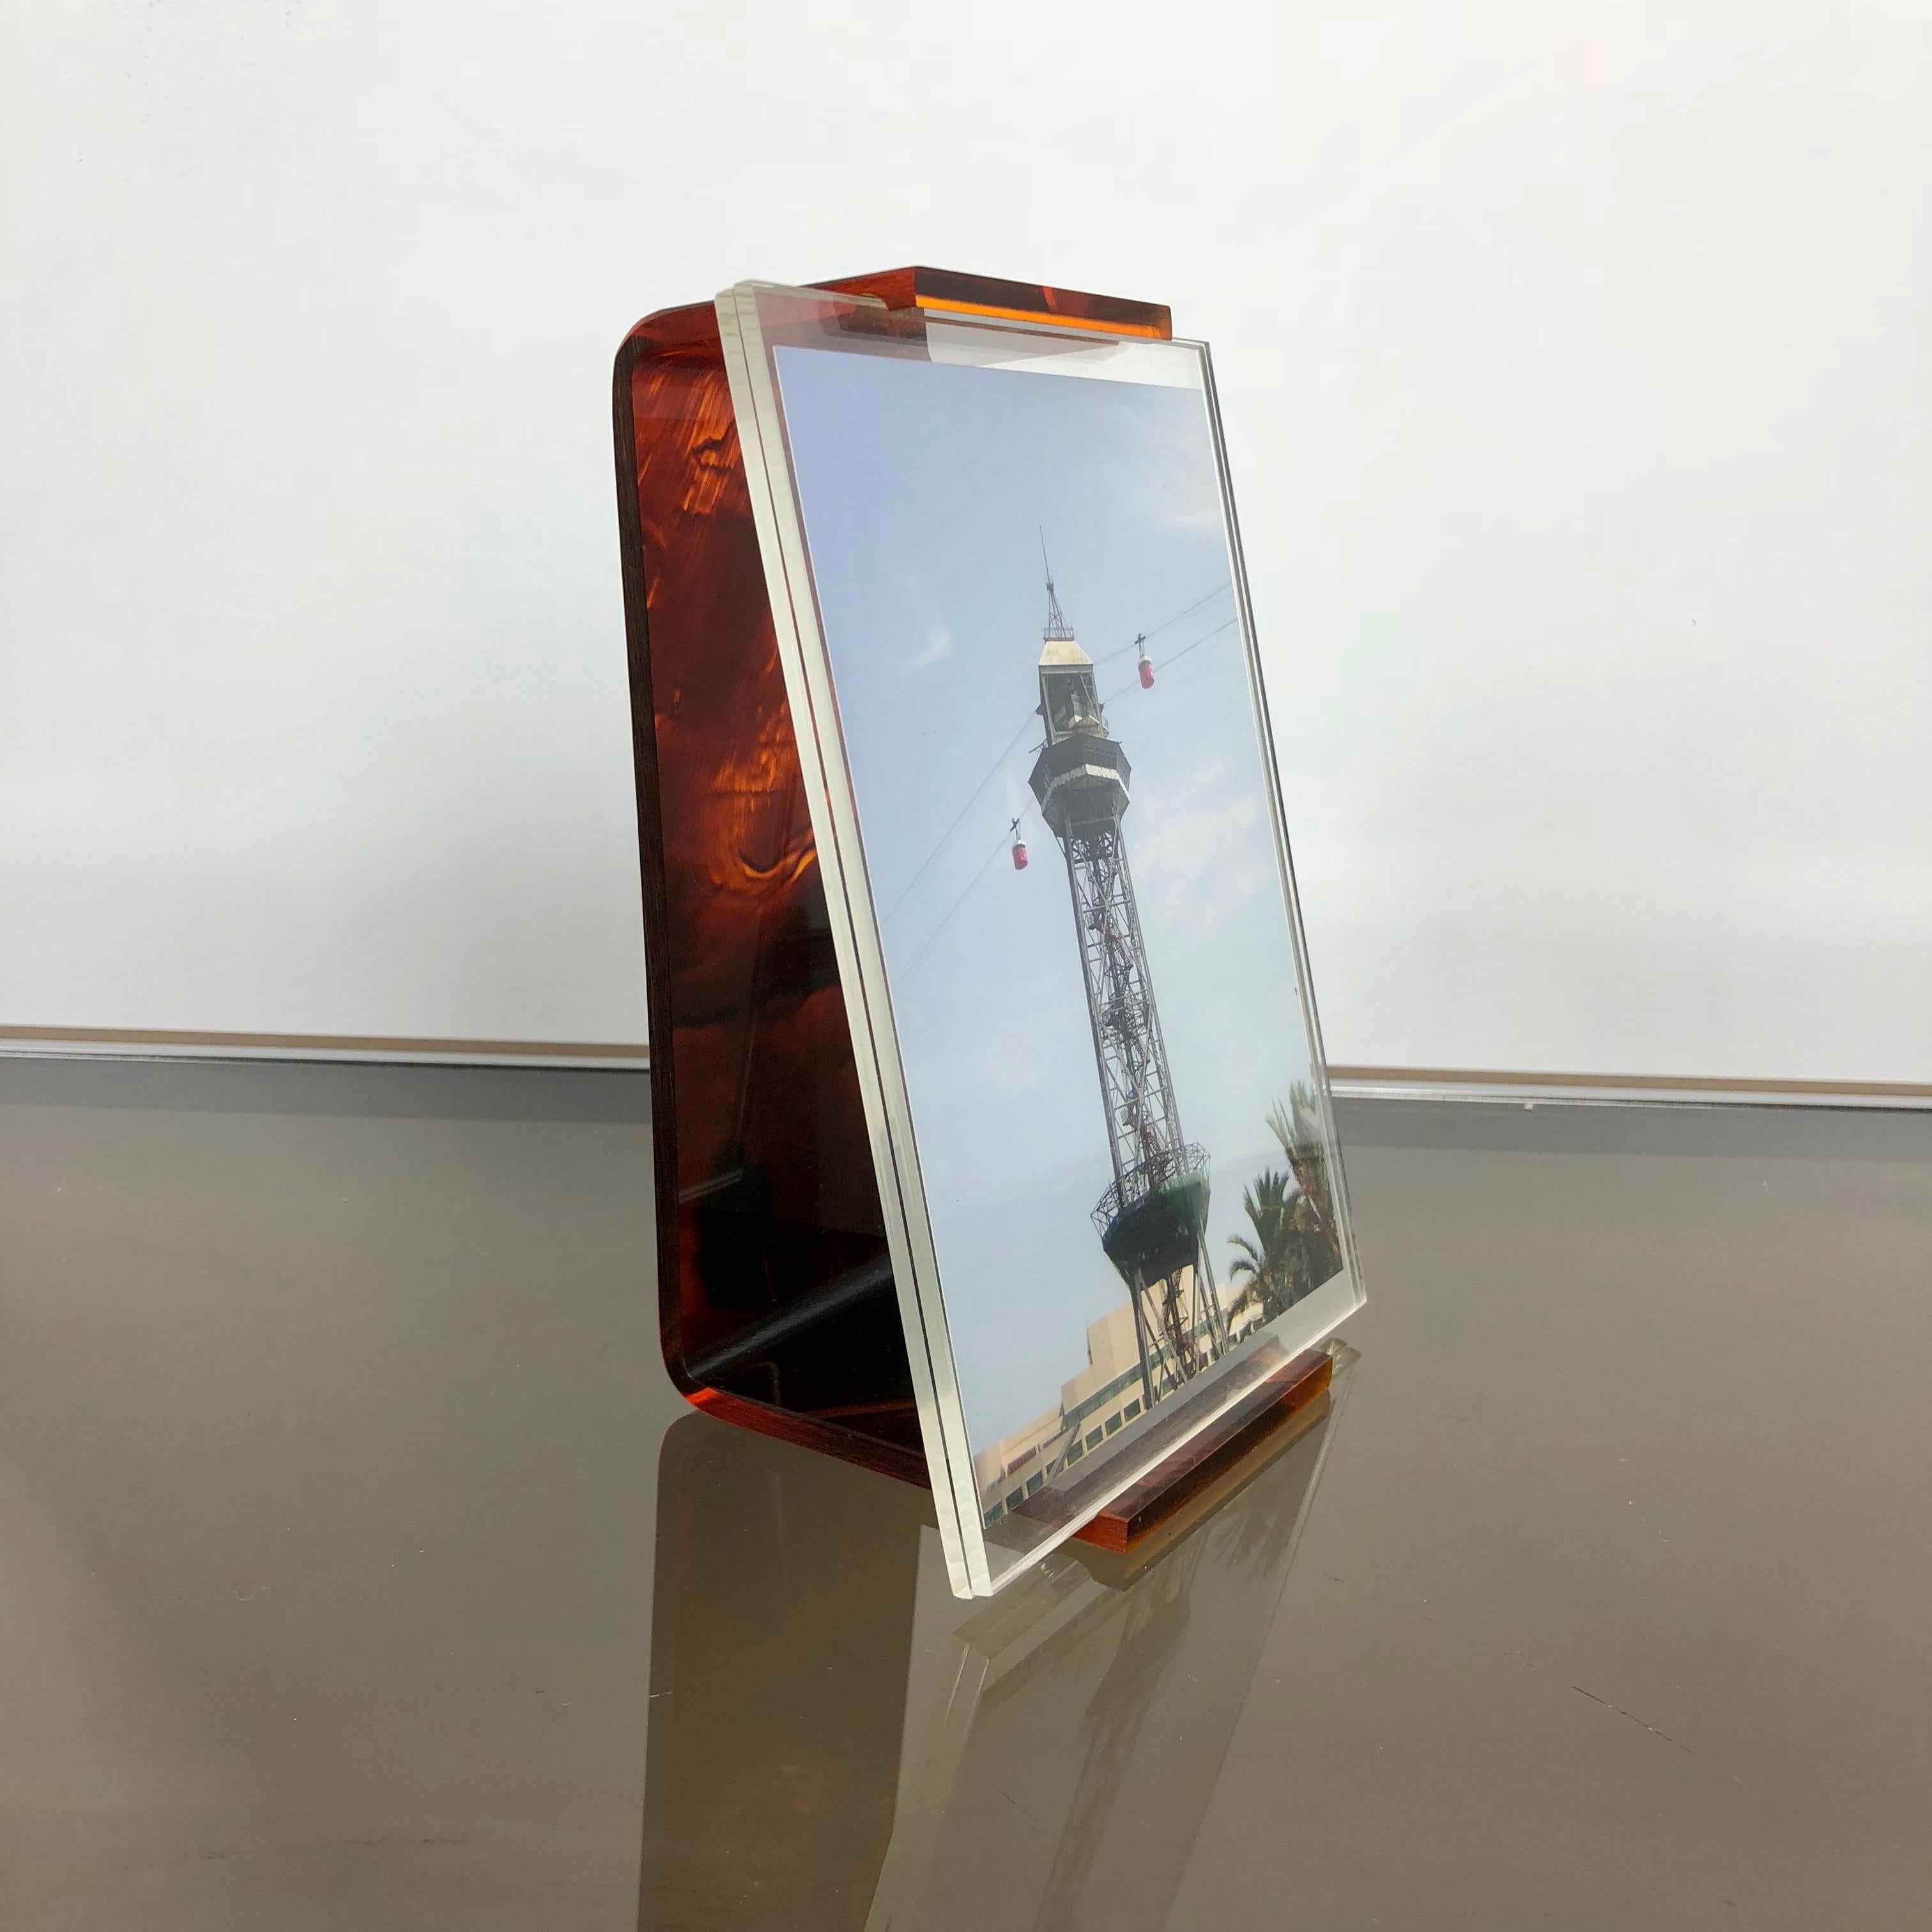 Tortoiseshell Lucite picture photo frame holder 1970s in Christian Dior style.